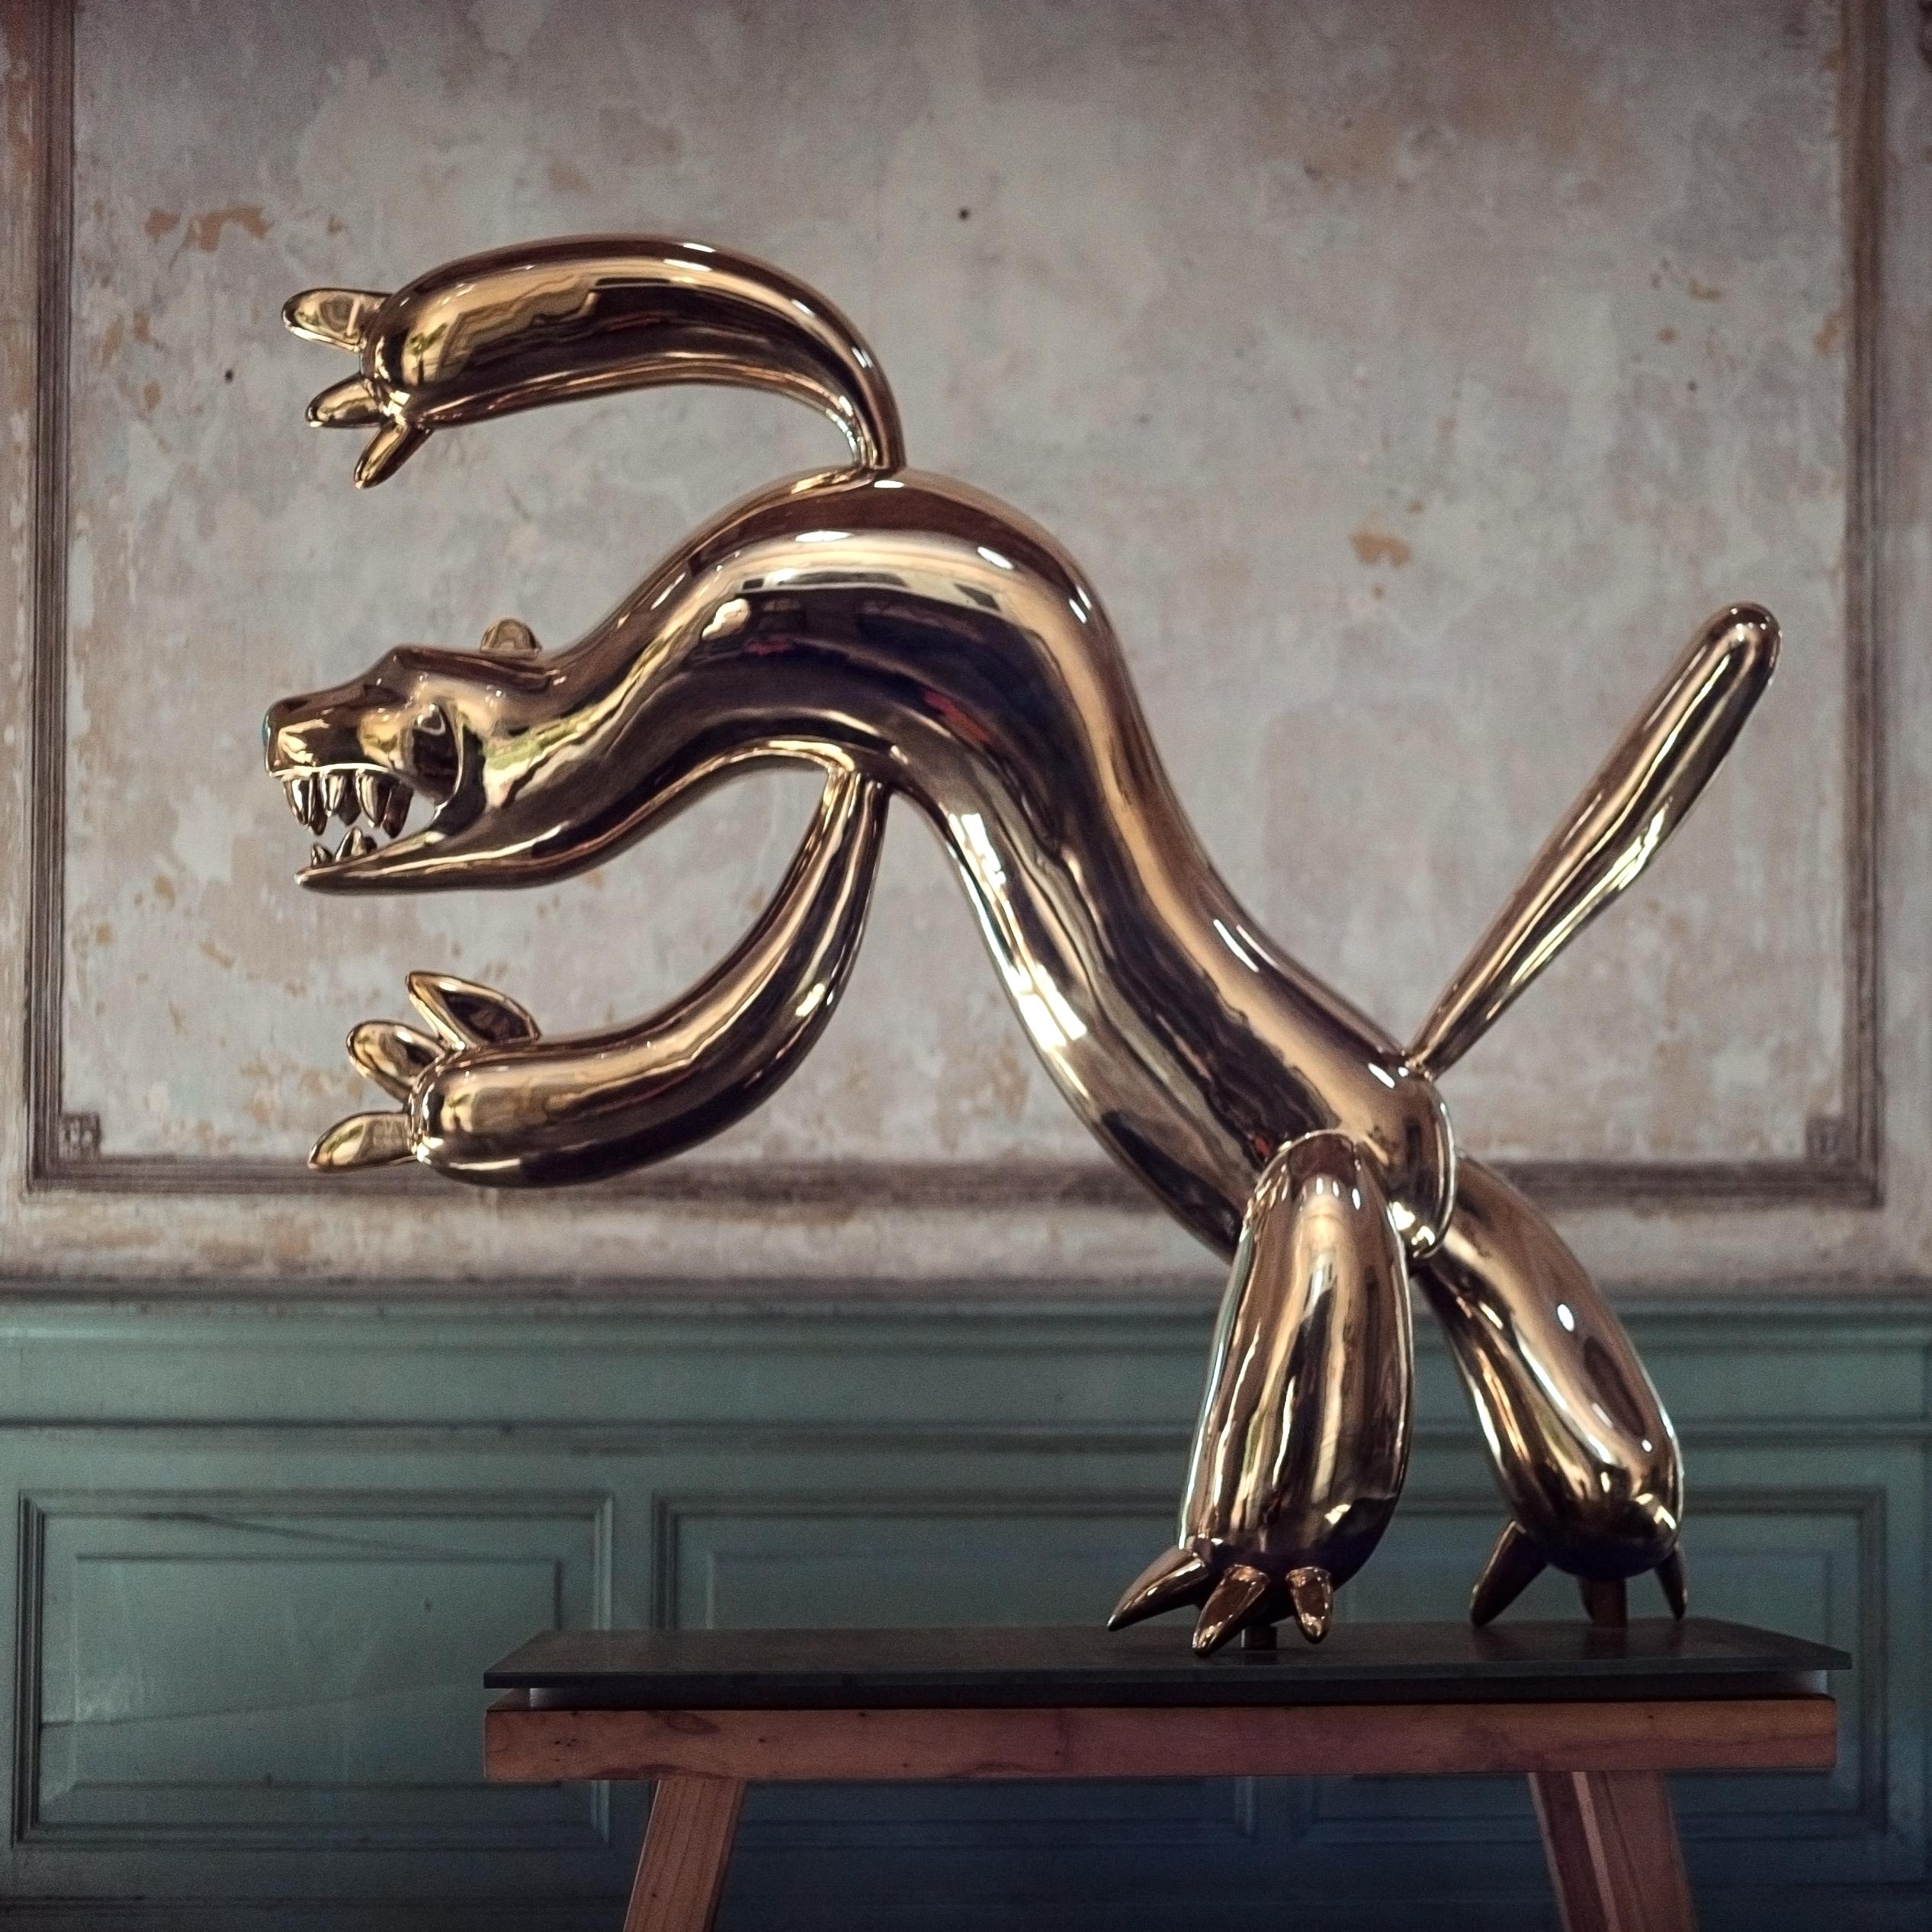 Tiger is a polished bronze sculpture by contemporary artist Marcelo Martin Burgos, dimensions are 130 × 150 × 30 cm (51.2 × 59.1 × 11.8 in). 
The sculpture is signed and numbered, it is part of a limited edition of 12 editions, and comes with a